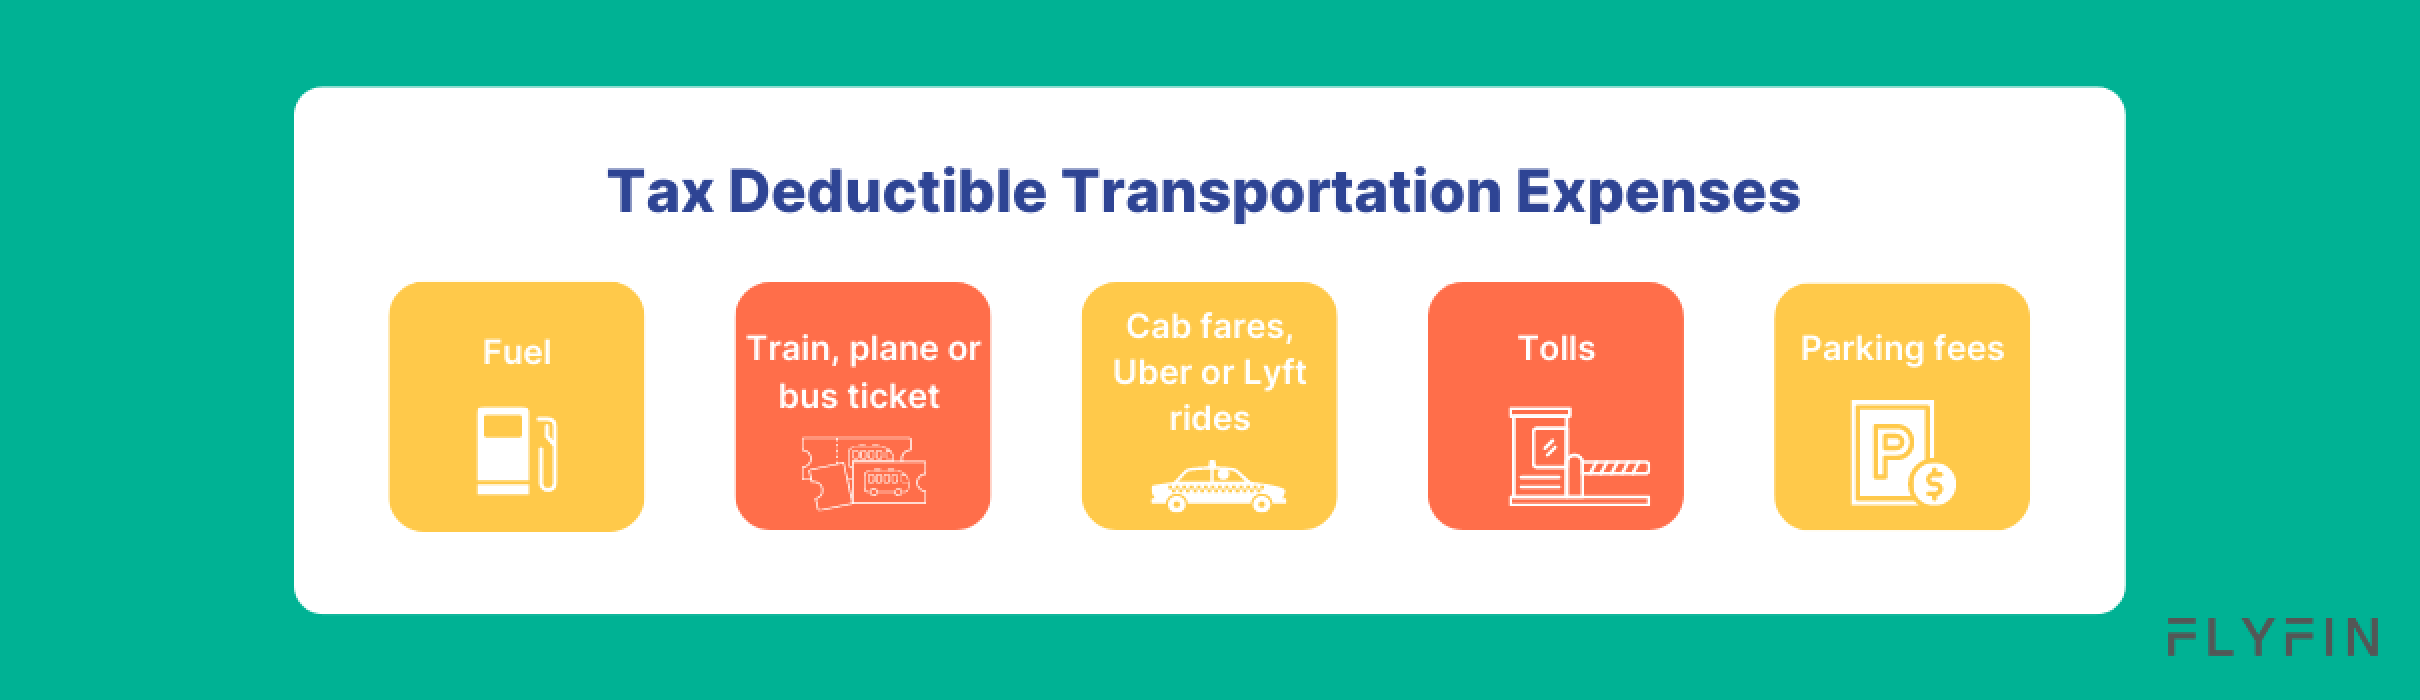 What transportation expenses are tax deductible?